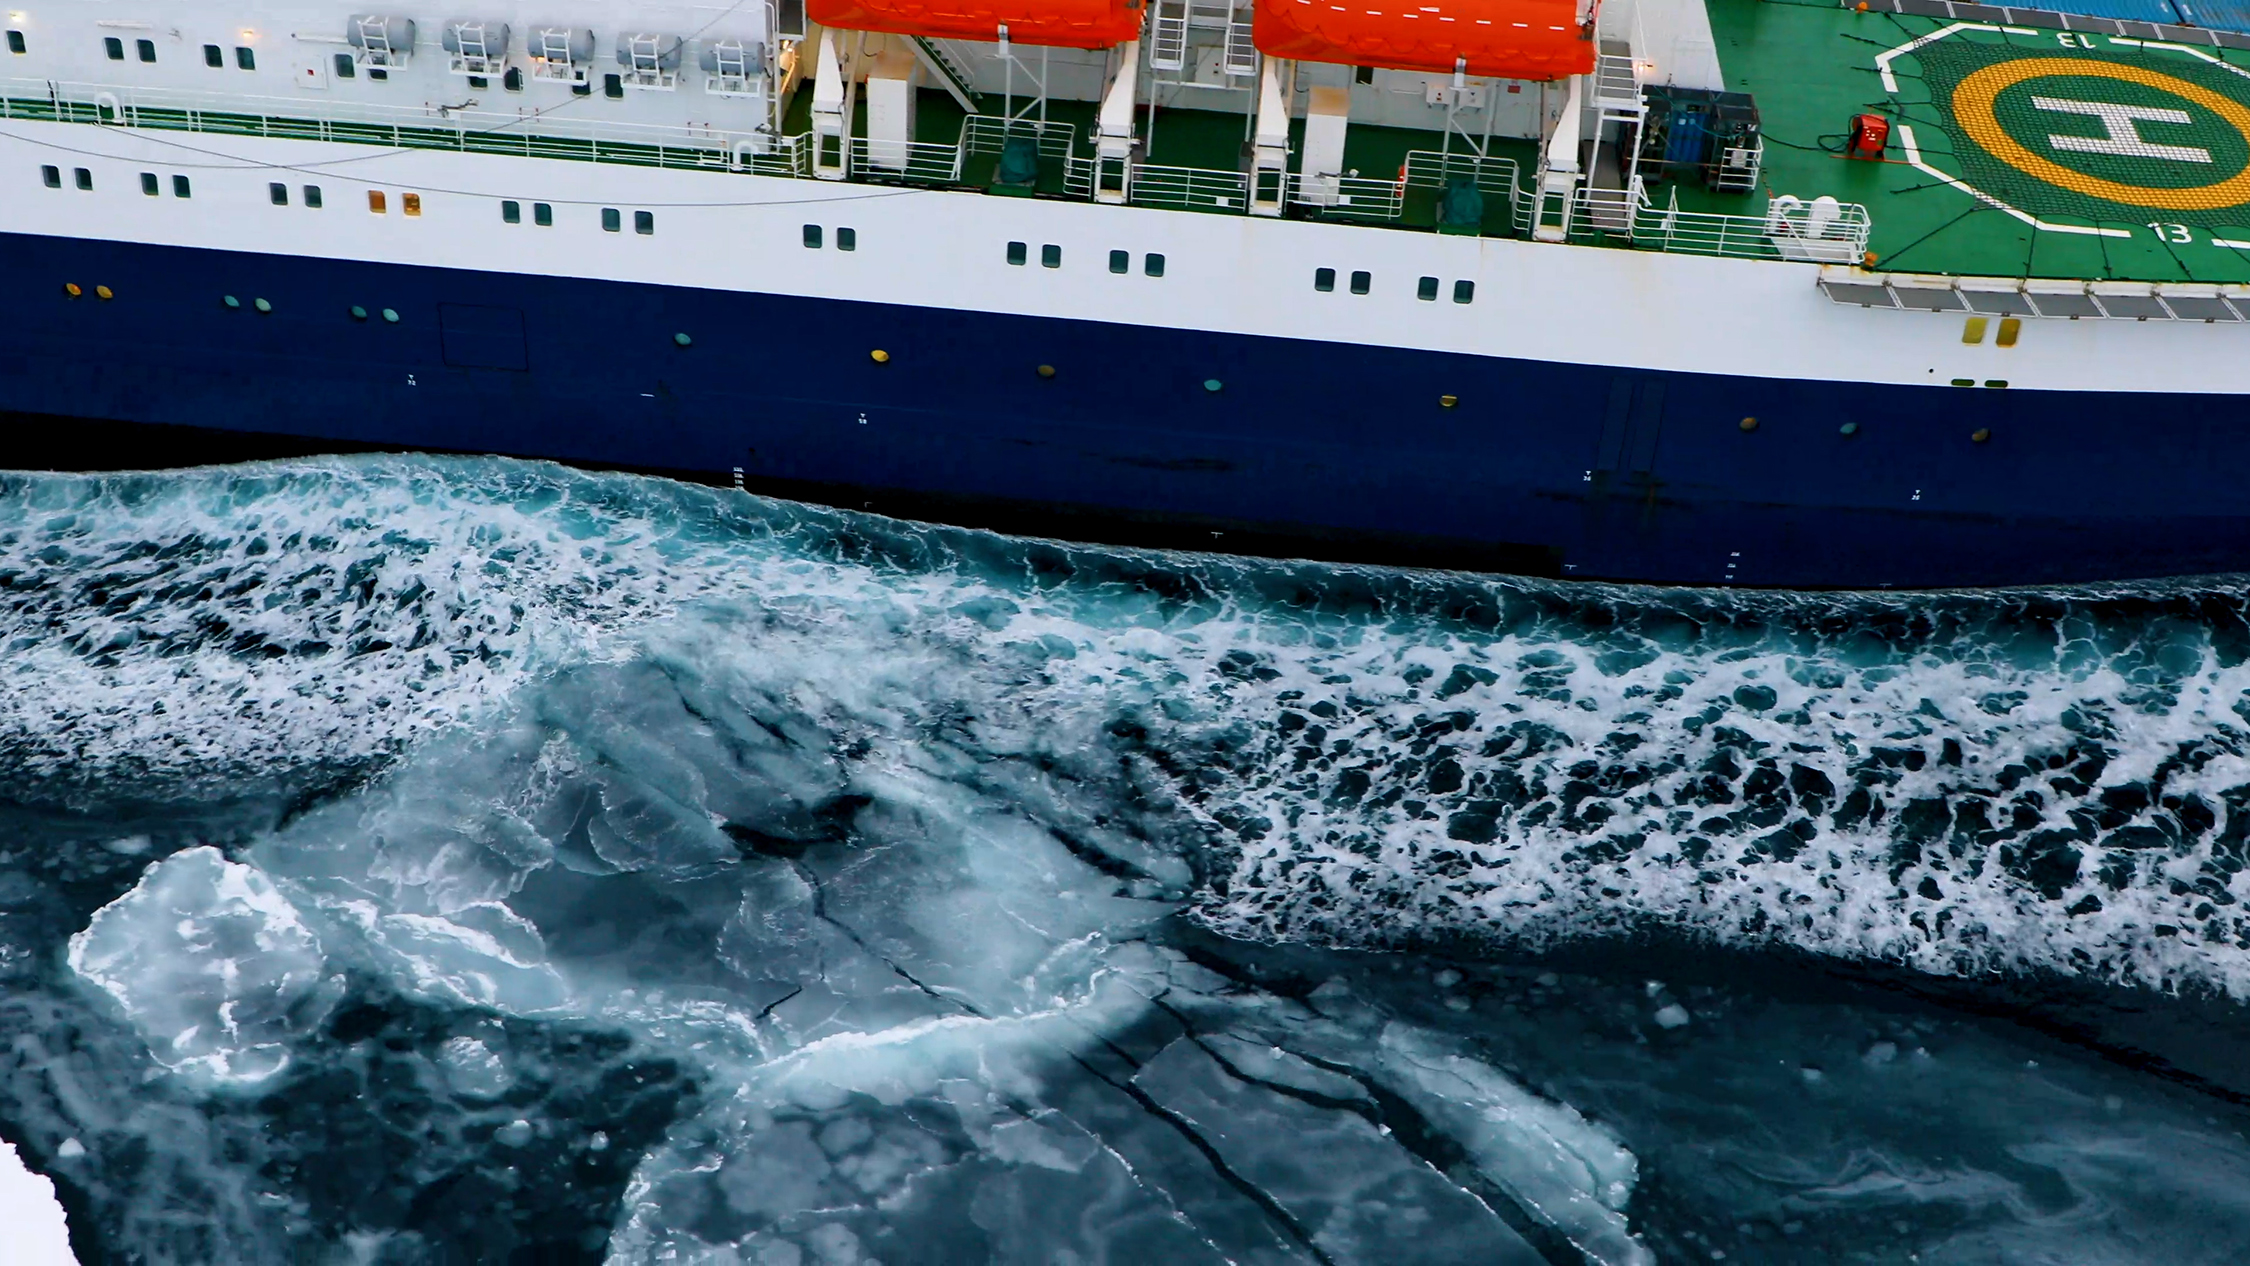 The research vessel Polerstern moves through icy waters in the Arctic Ocean.